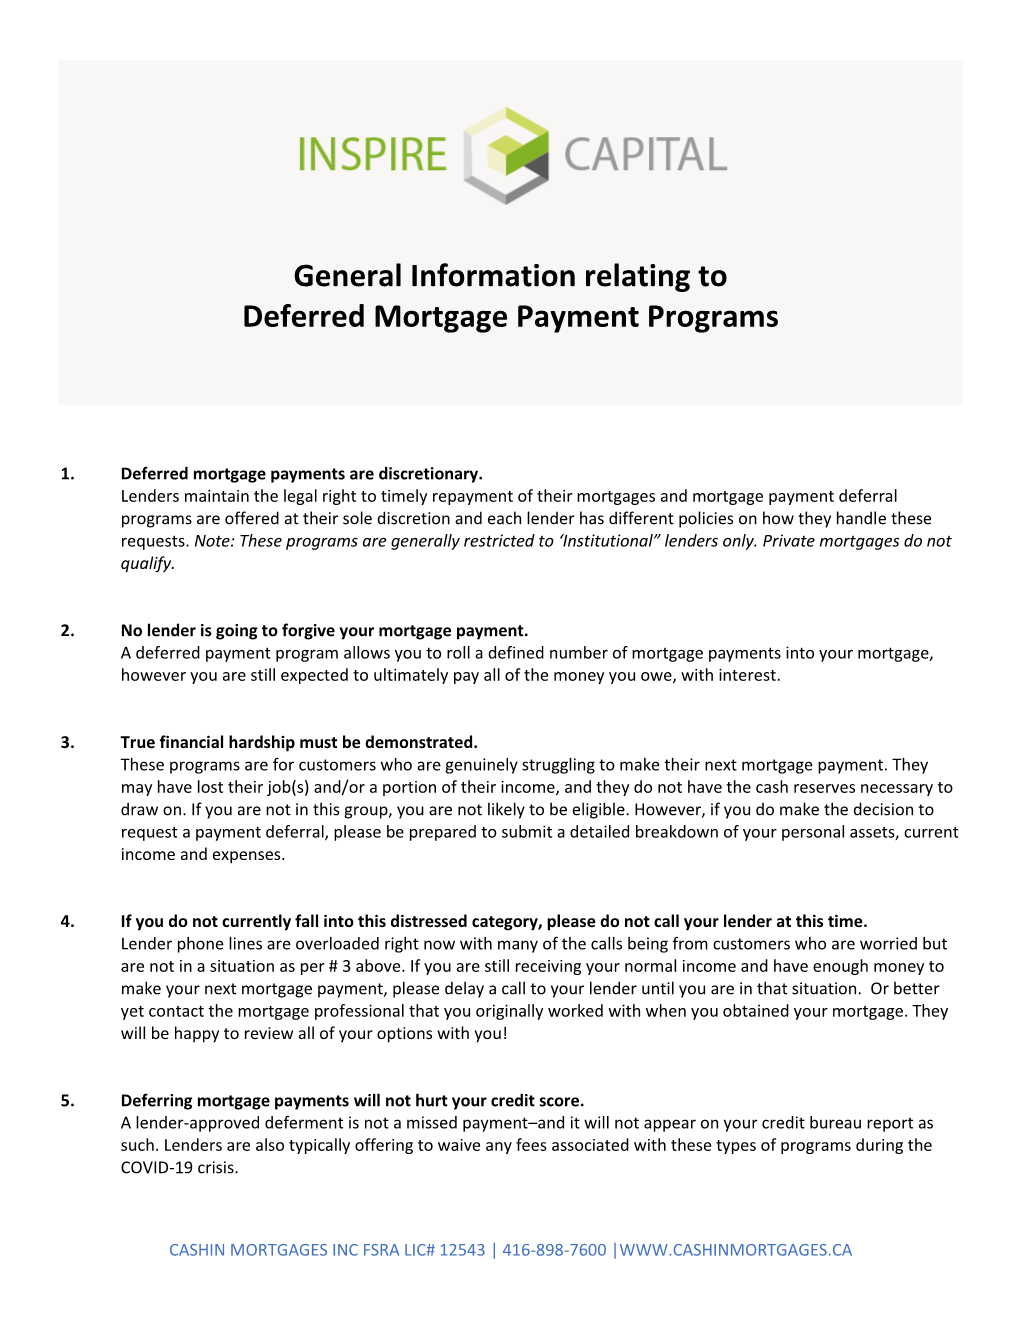 General Information Relating to Deferred Mortgage Payment Programs